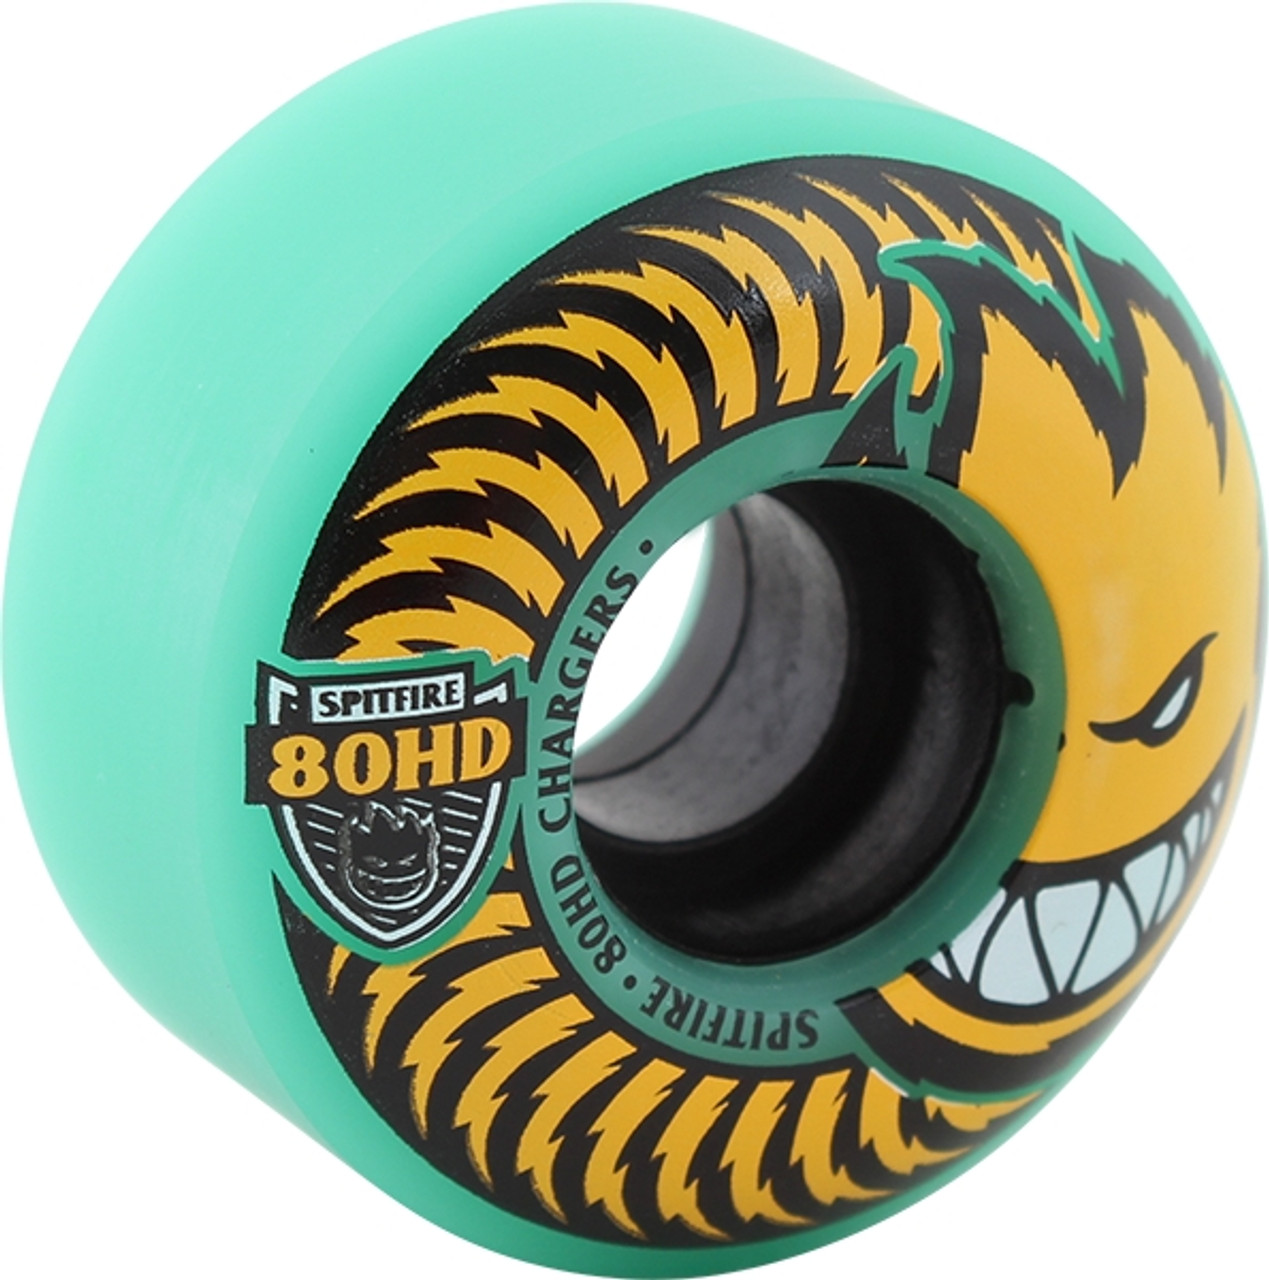 SPITFIRE 80HD CHARGER CLASSIC 58mm TEAL/YEL WHEELS SET